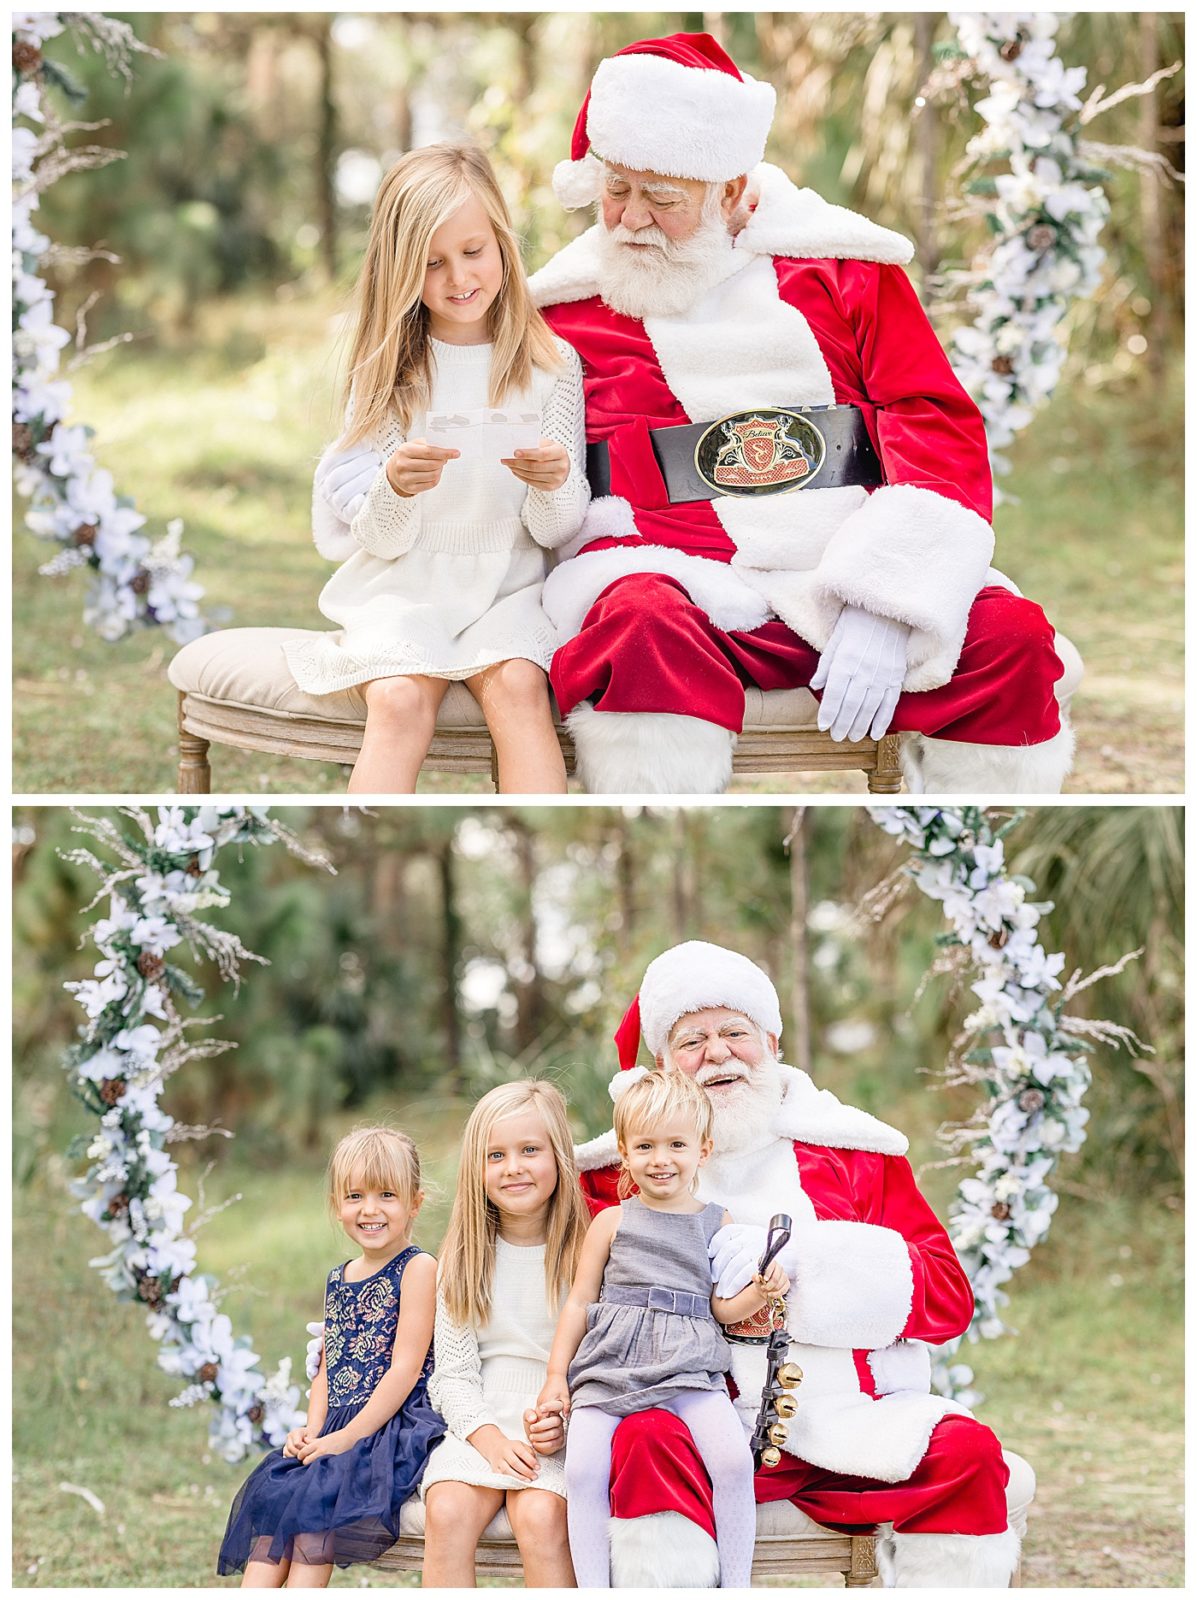 Little girl sits on Santa's lap in Miami Santa session. Photo by Ivanna Vidal Photography.